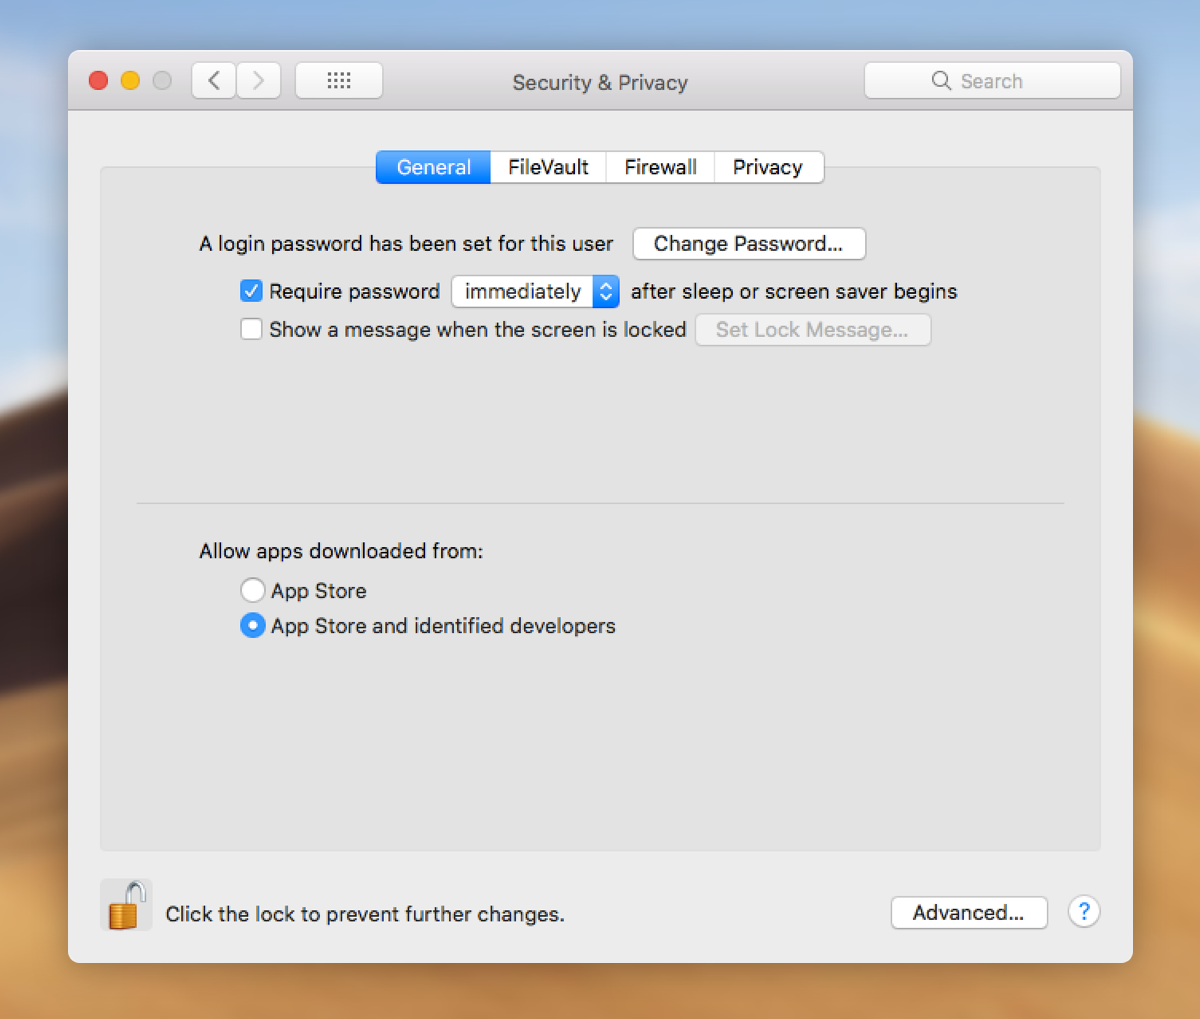 Remove mac adware cleaner pop up